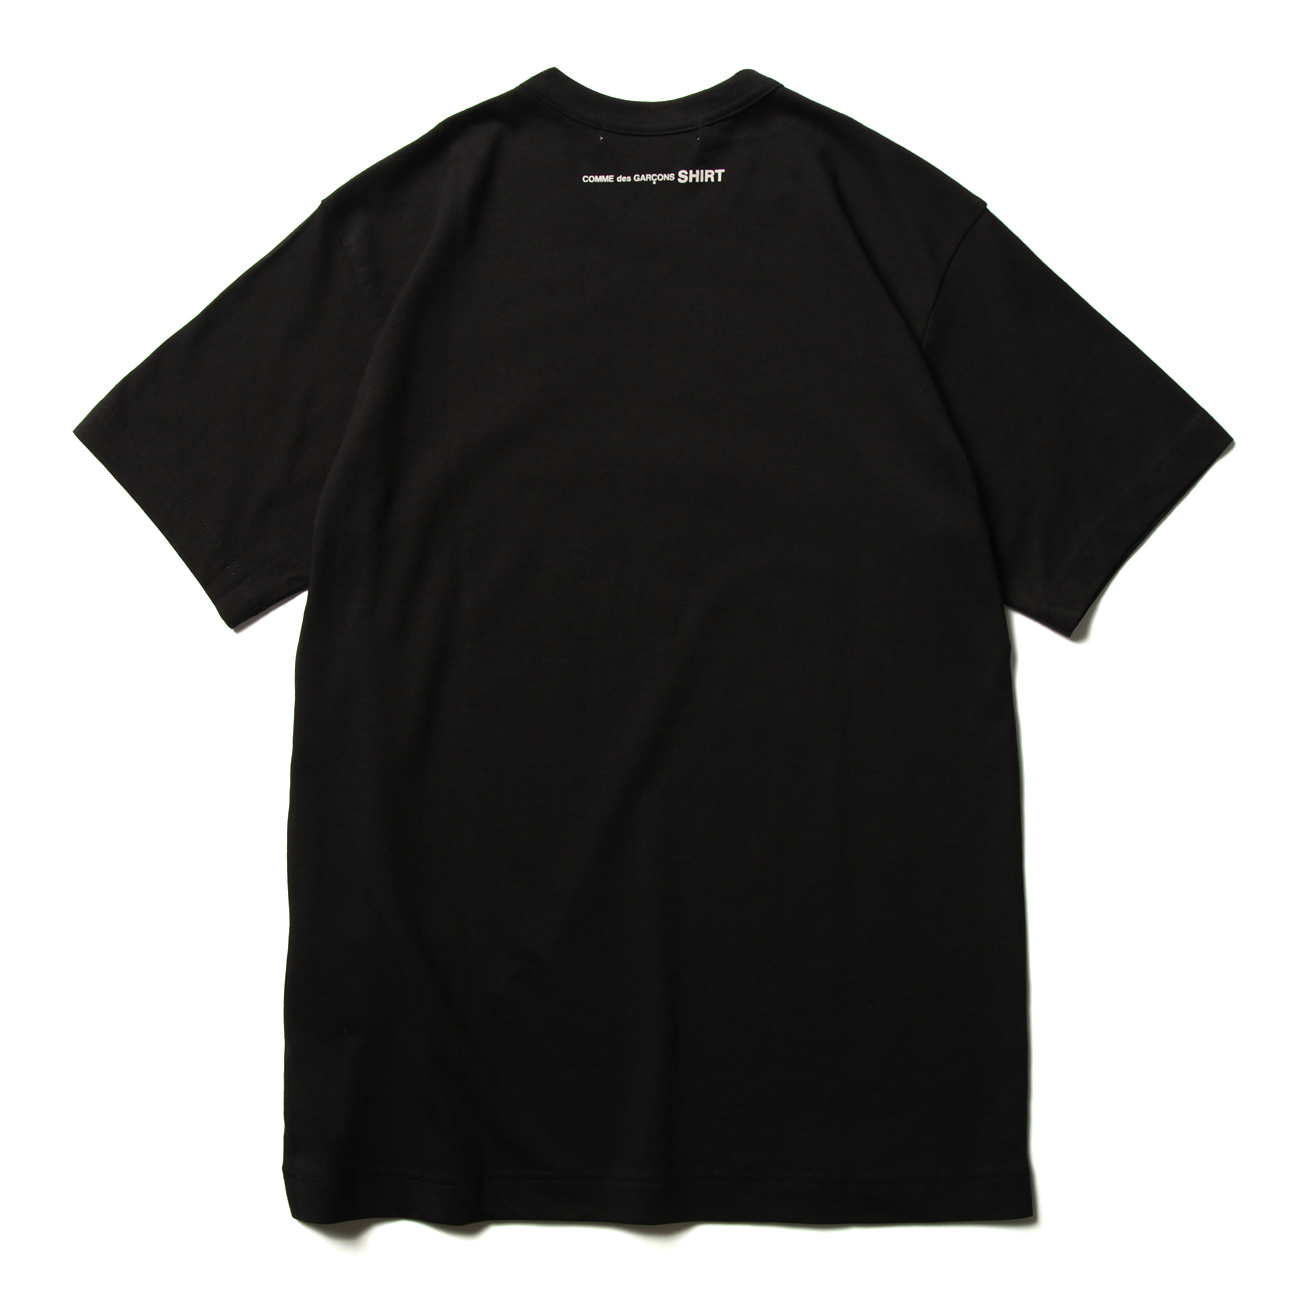 cotton jersey plain with CDG SHIRT logo on back / Tshirt 